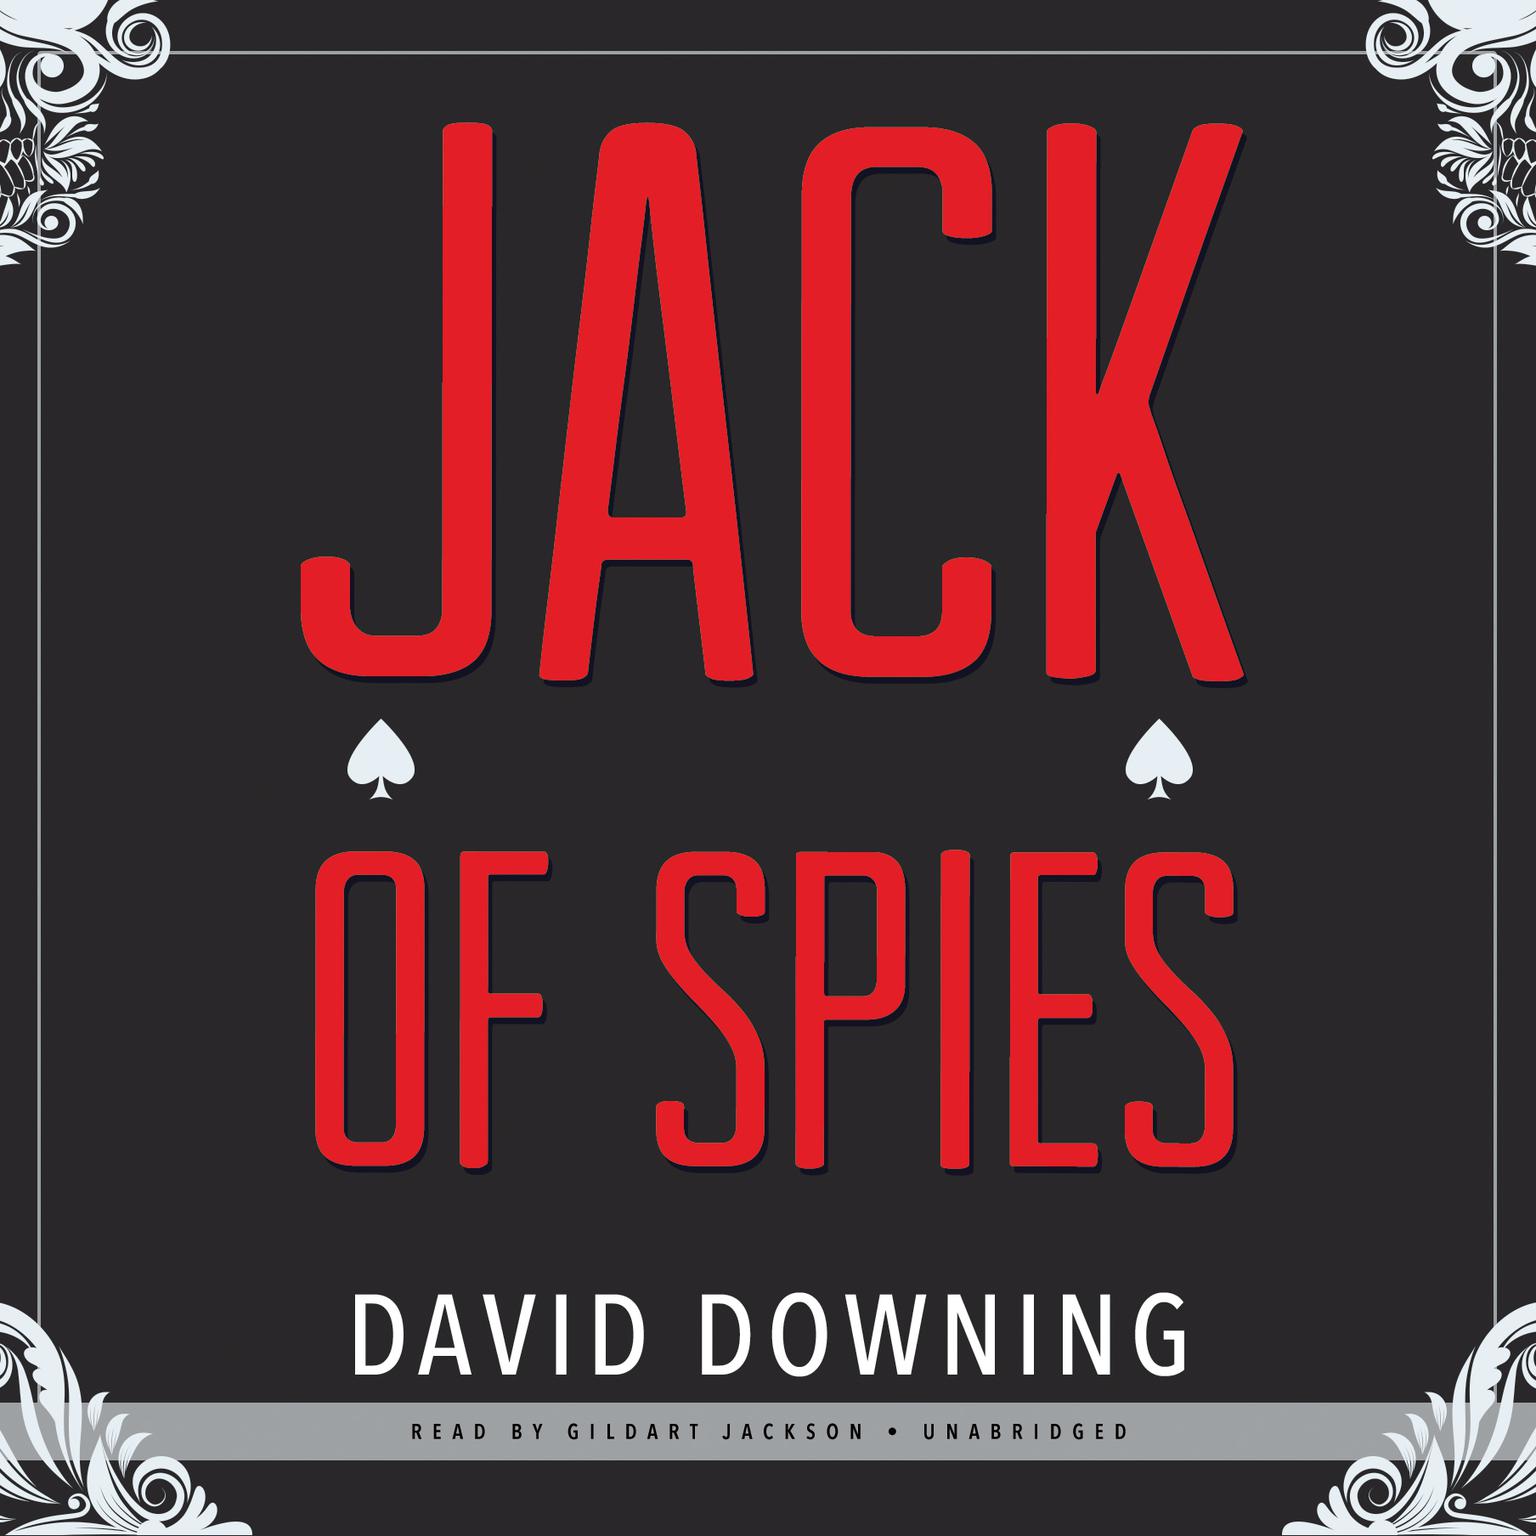 Jack of Spies Audiobook, by David Downing